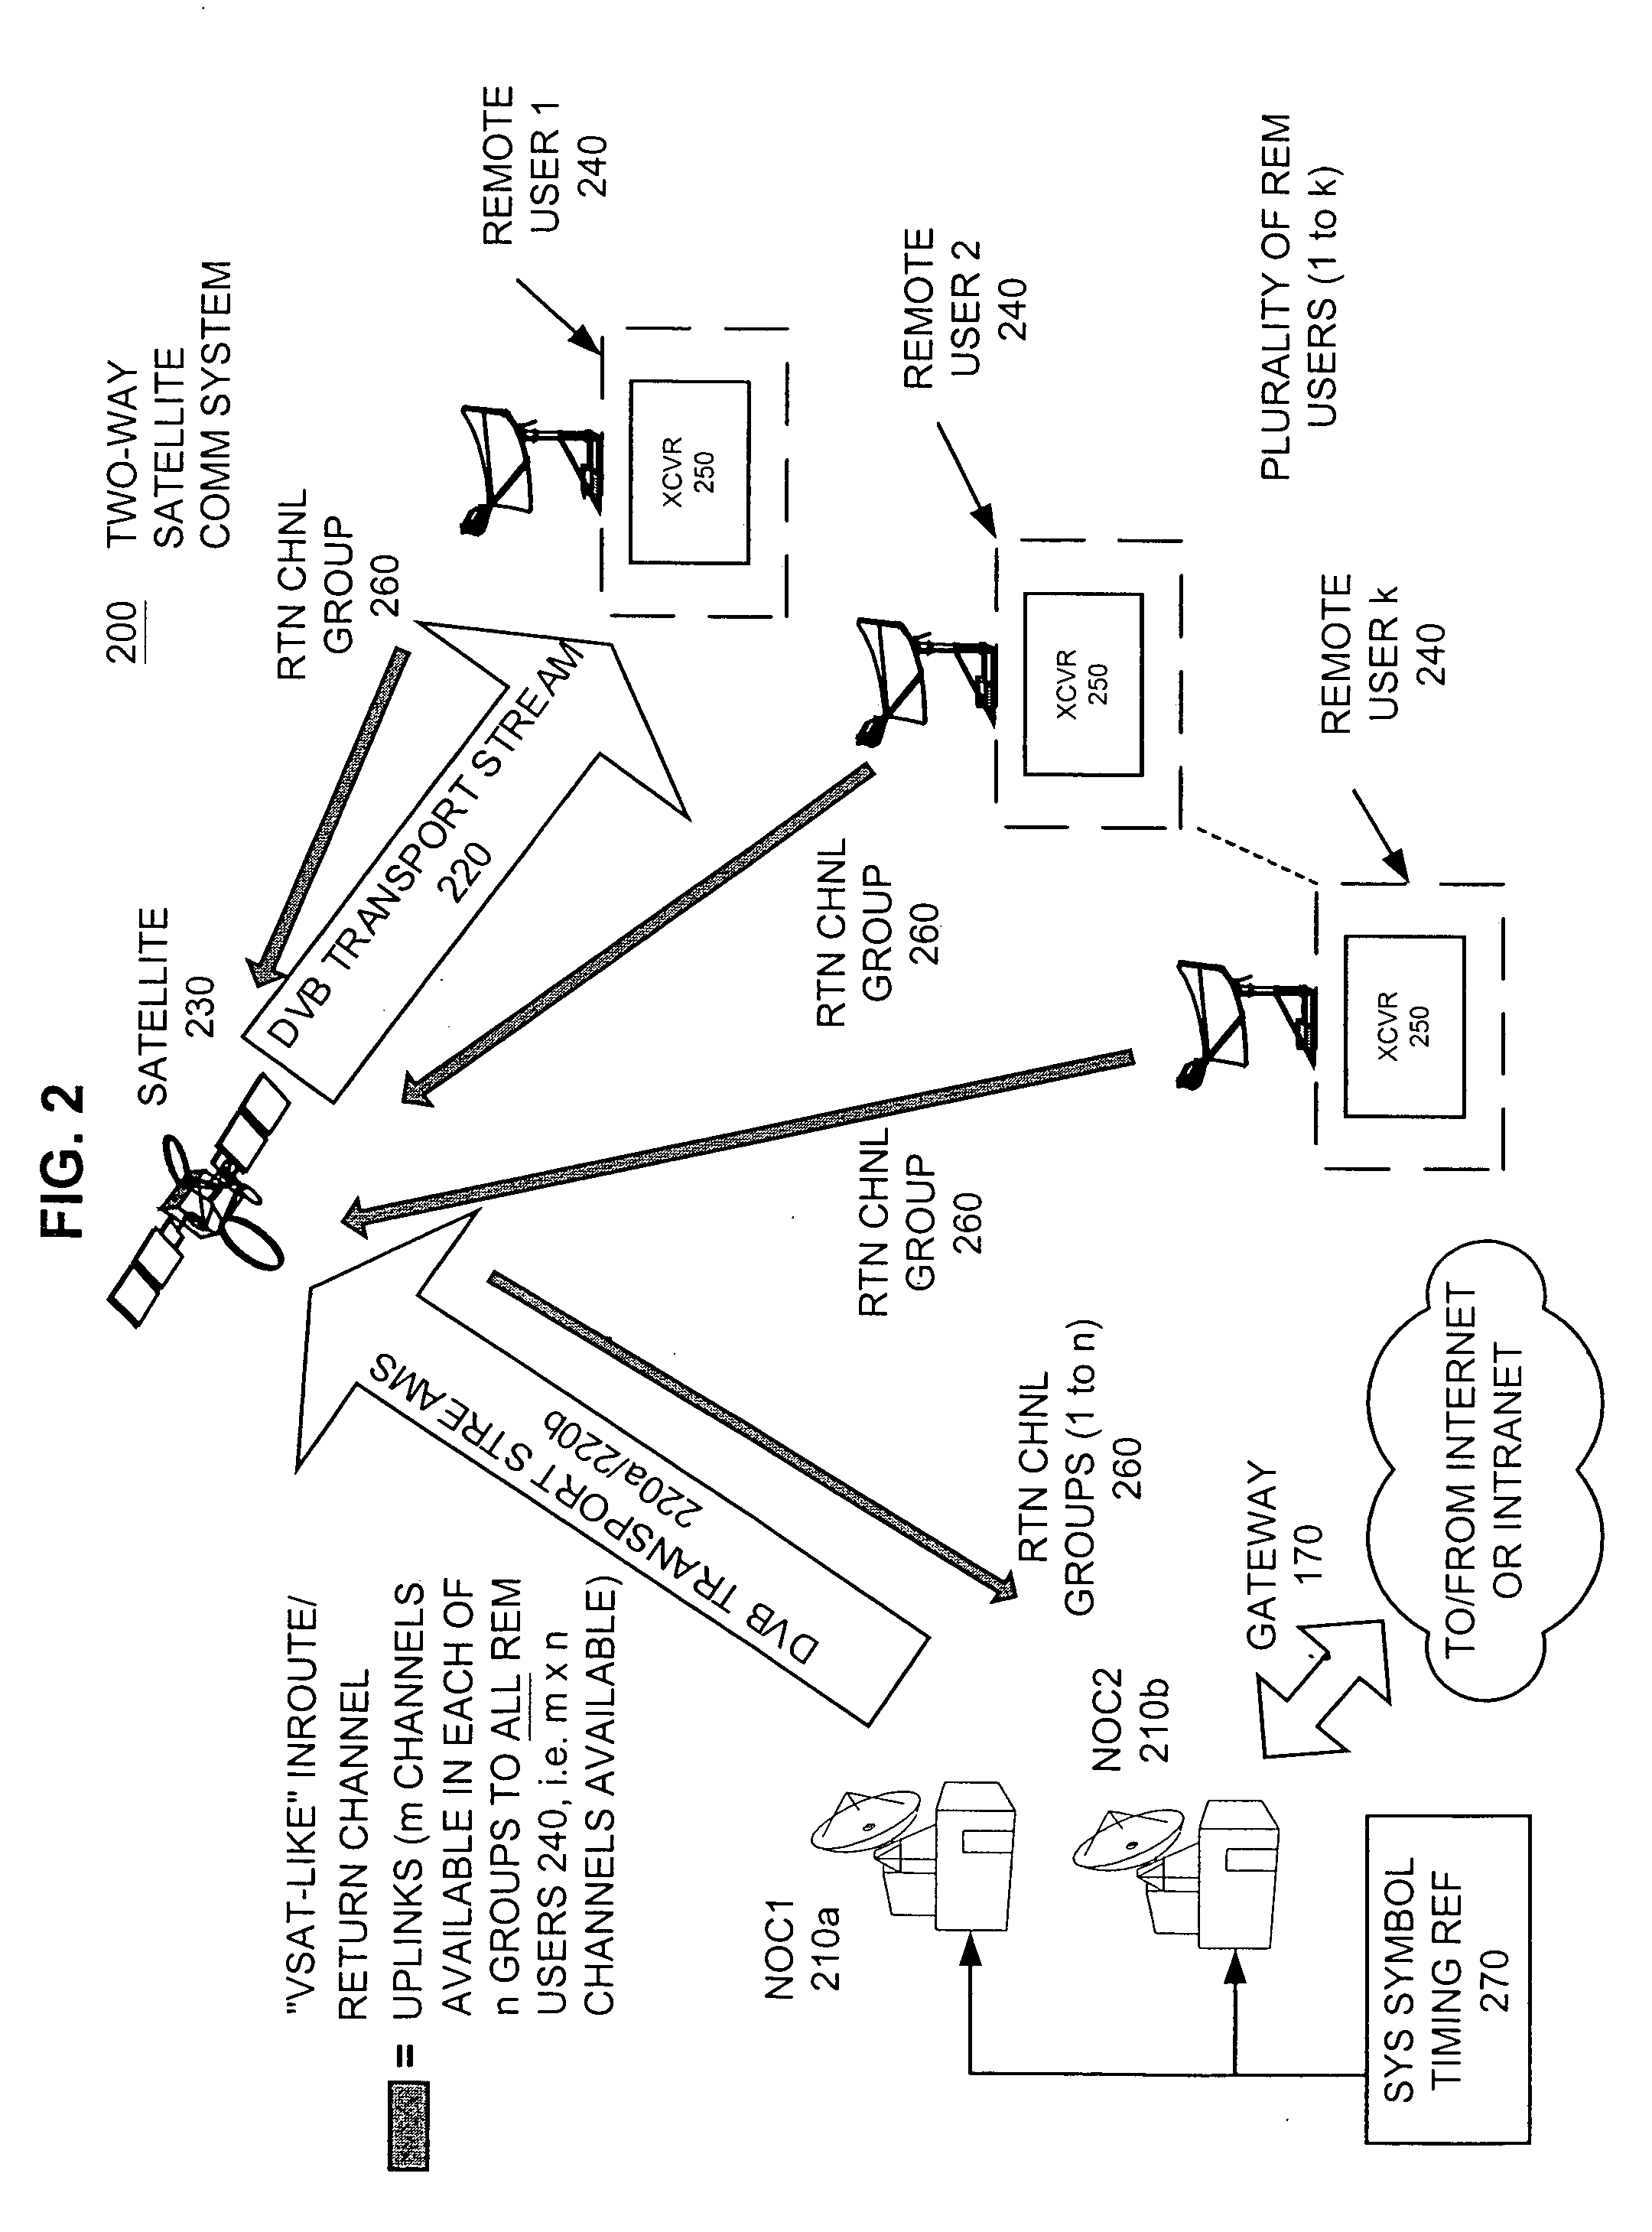 Apparatus and method for efficient TDMA bandwidth allocation for TCP/IP satellite-based networks